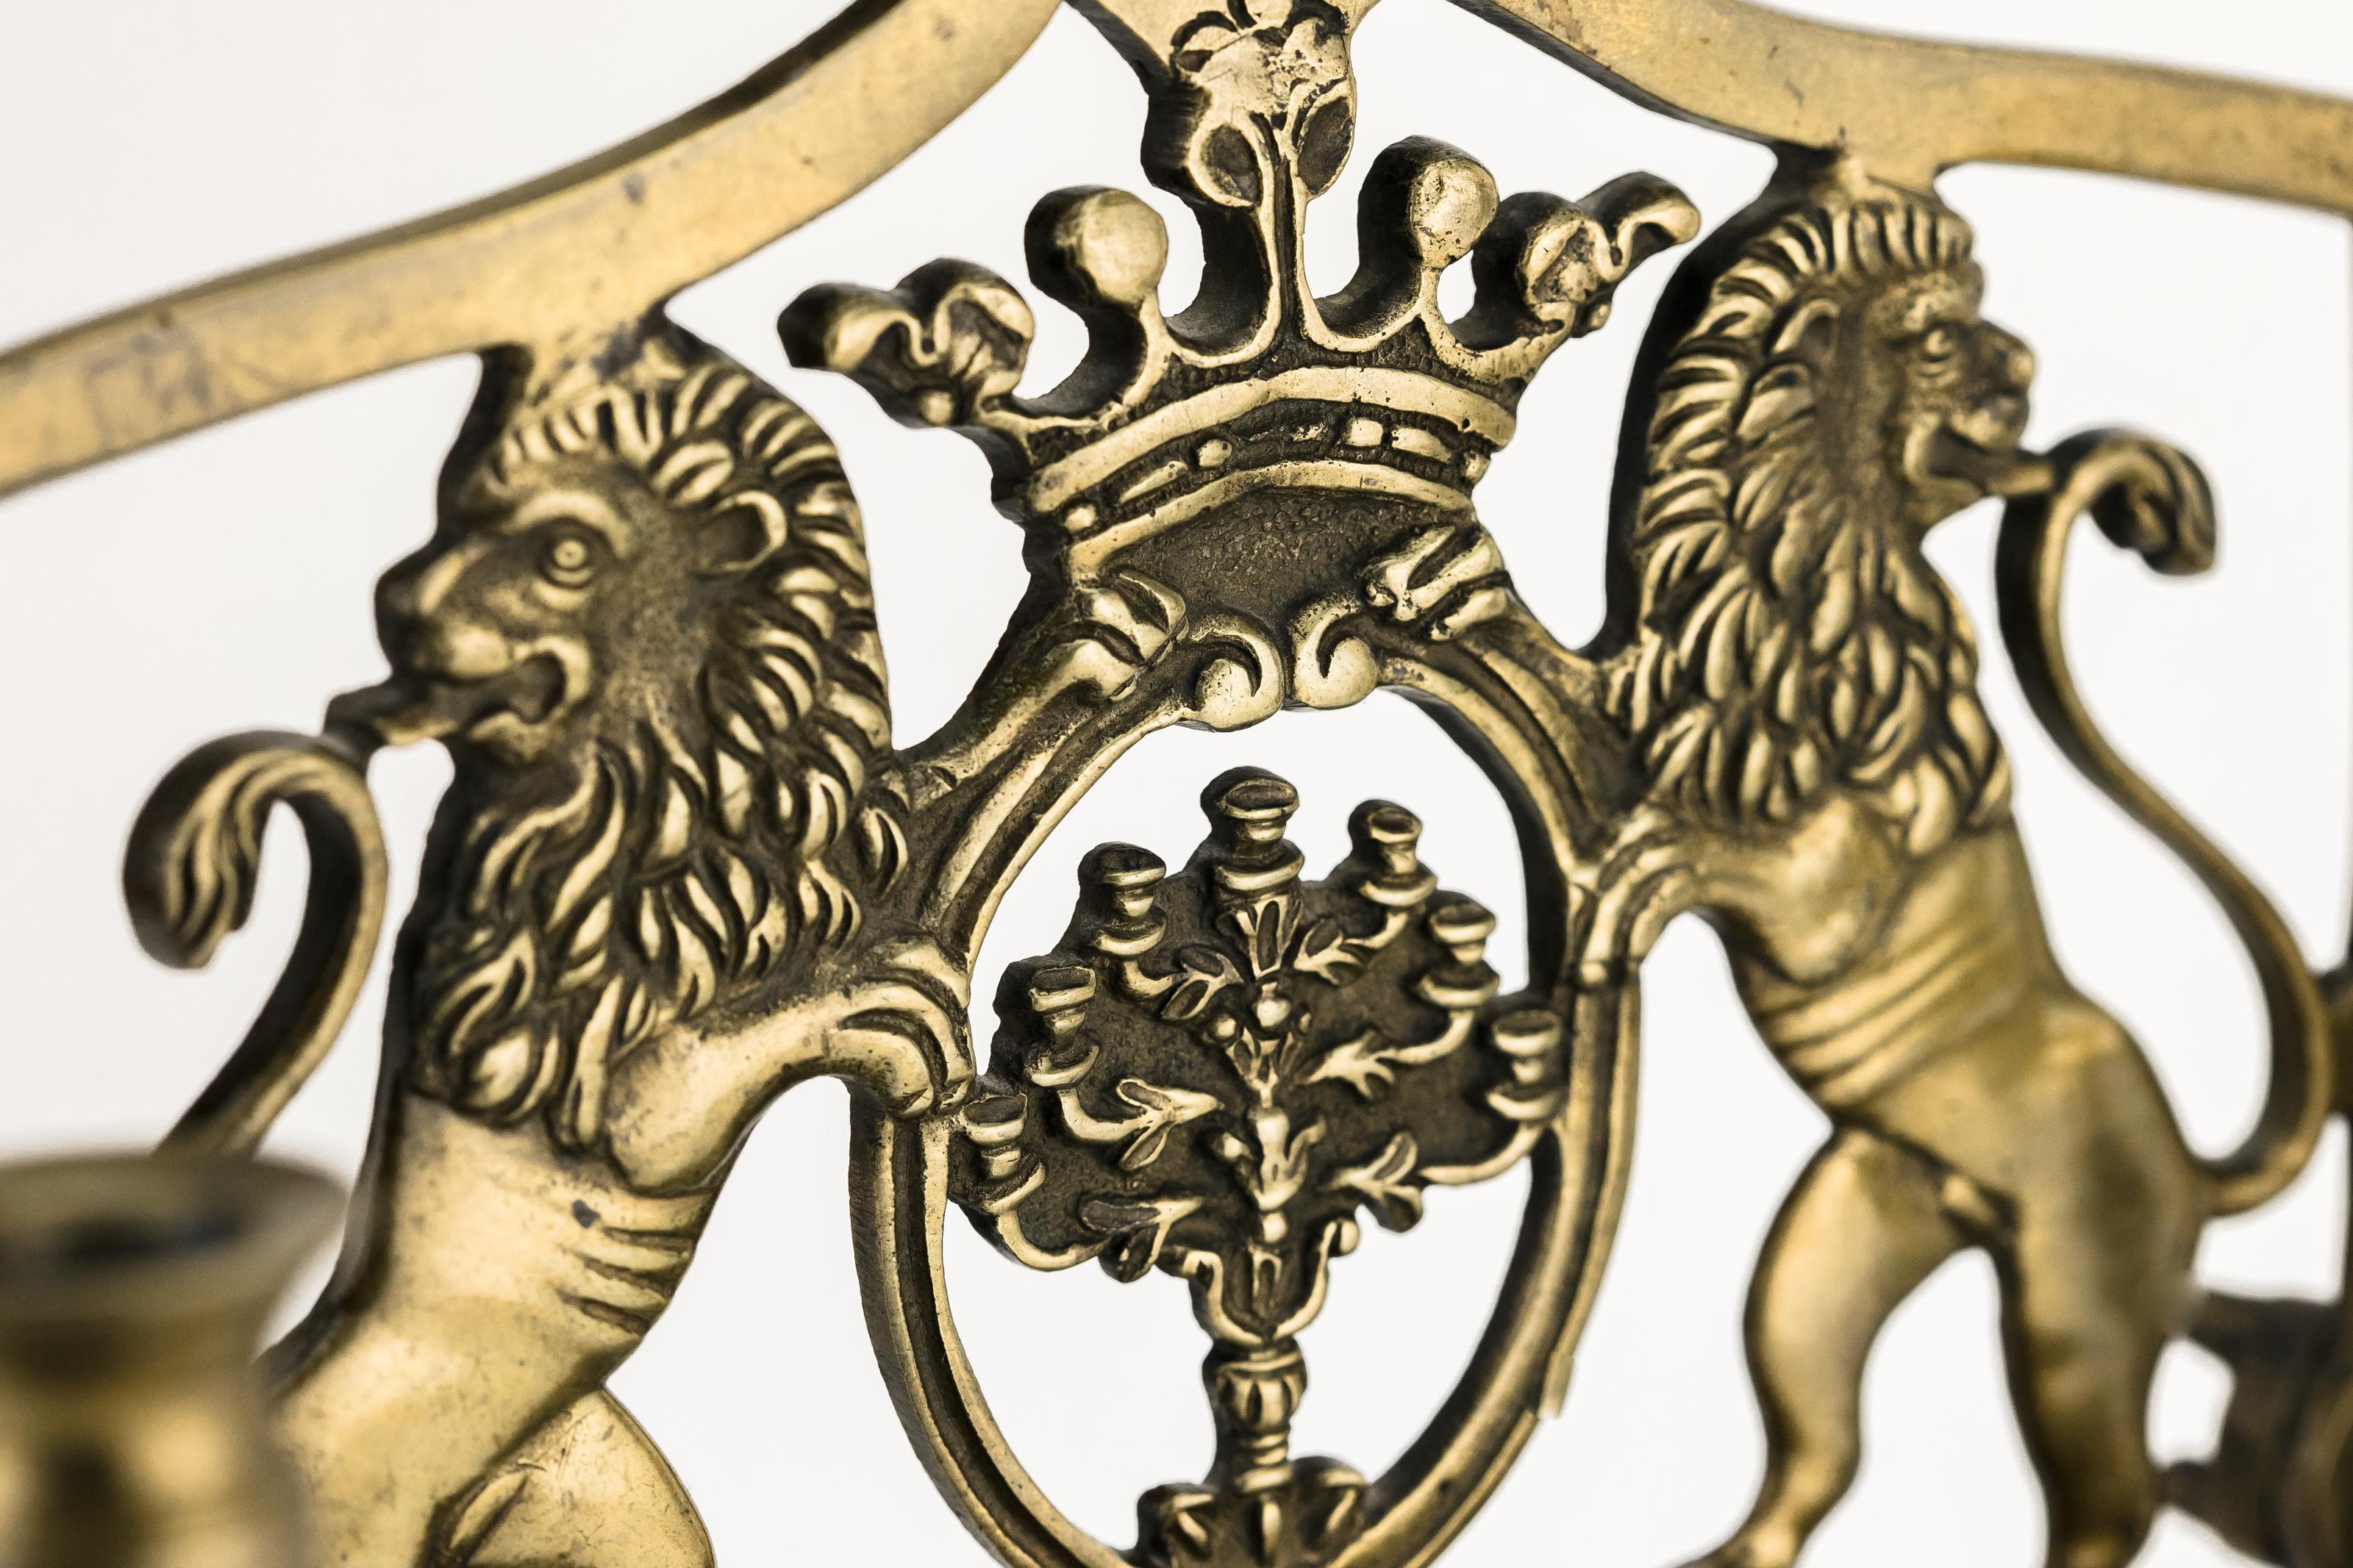 The backplate is cast with two rampant Lions of Judah flanking a topped crown cartouche with the Temple Menorah inside, the side panels fitted with two servant lights, fronted by a row of eight oil fonts with the boxed drip pan.
Scholars theorize